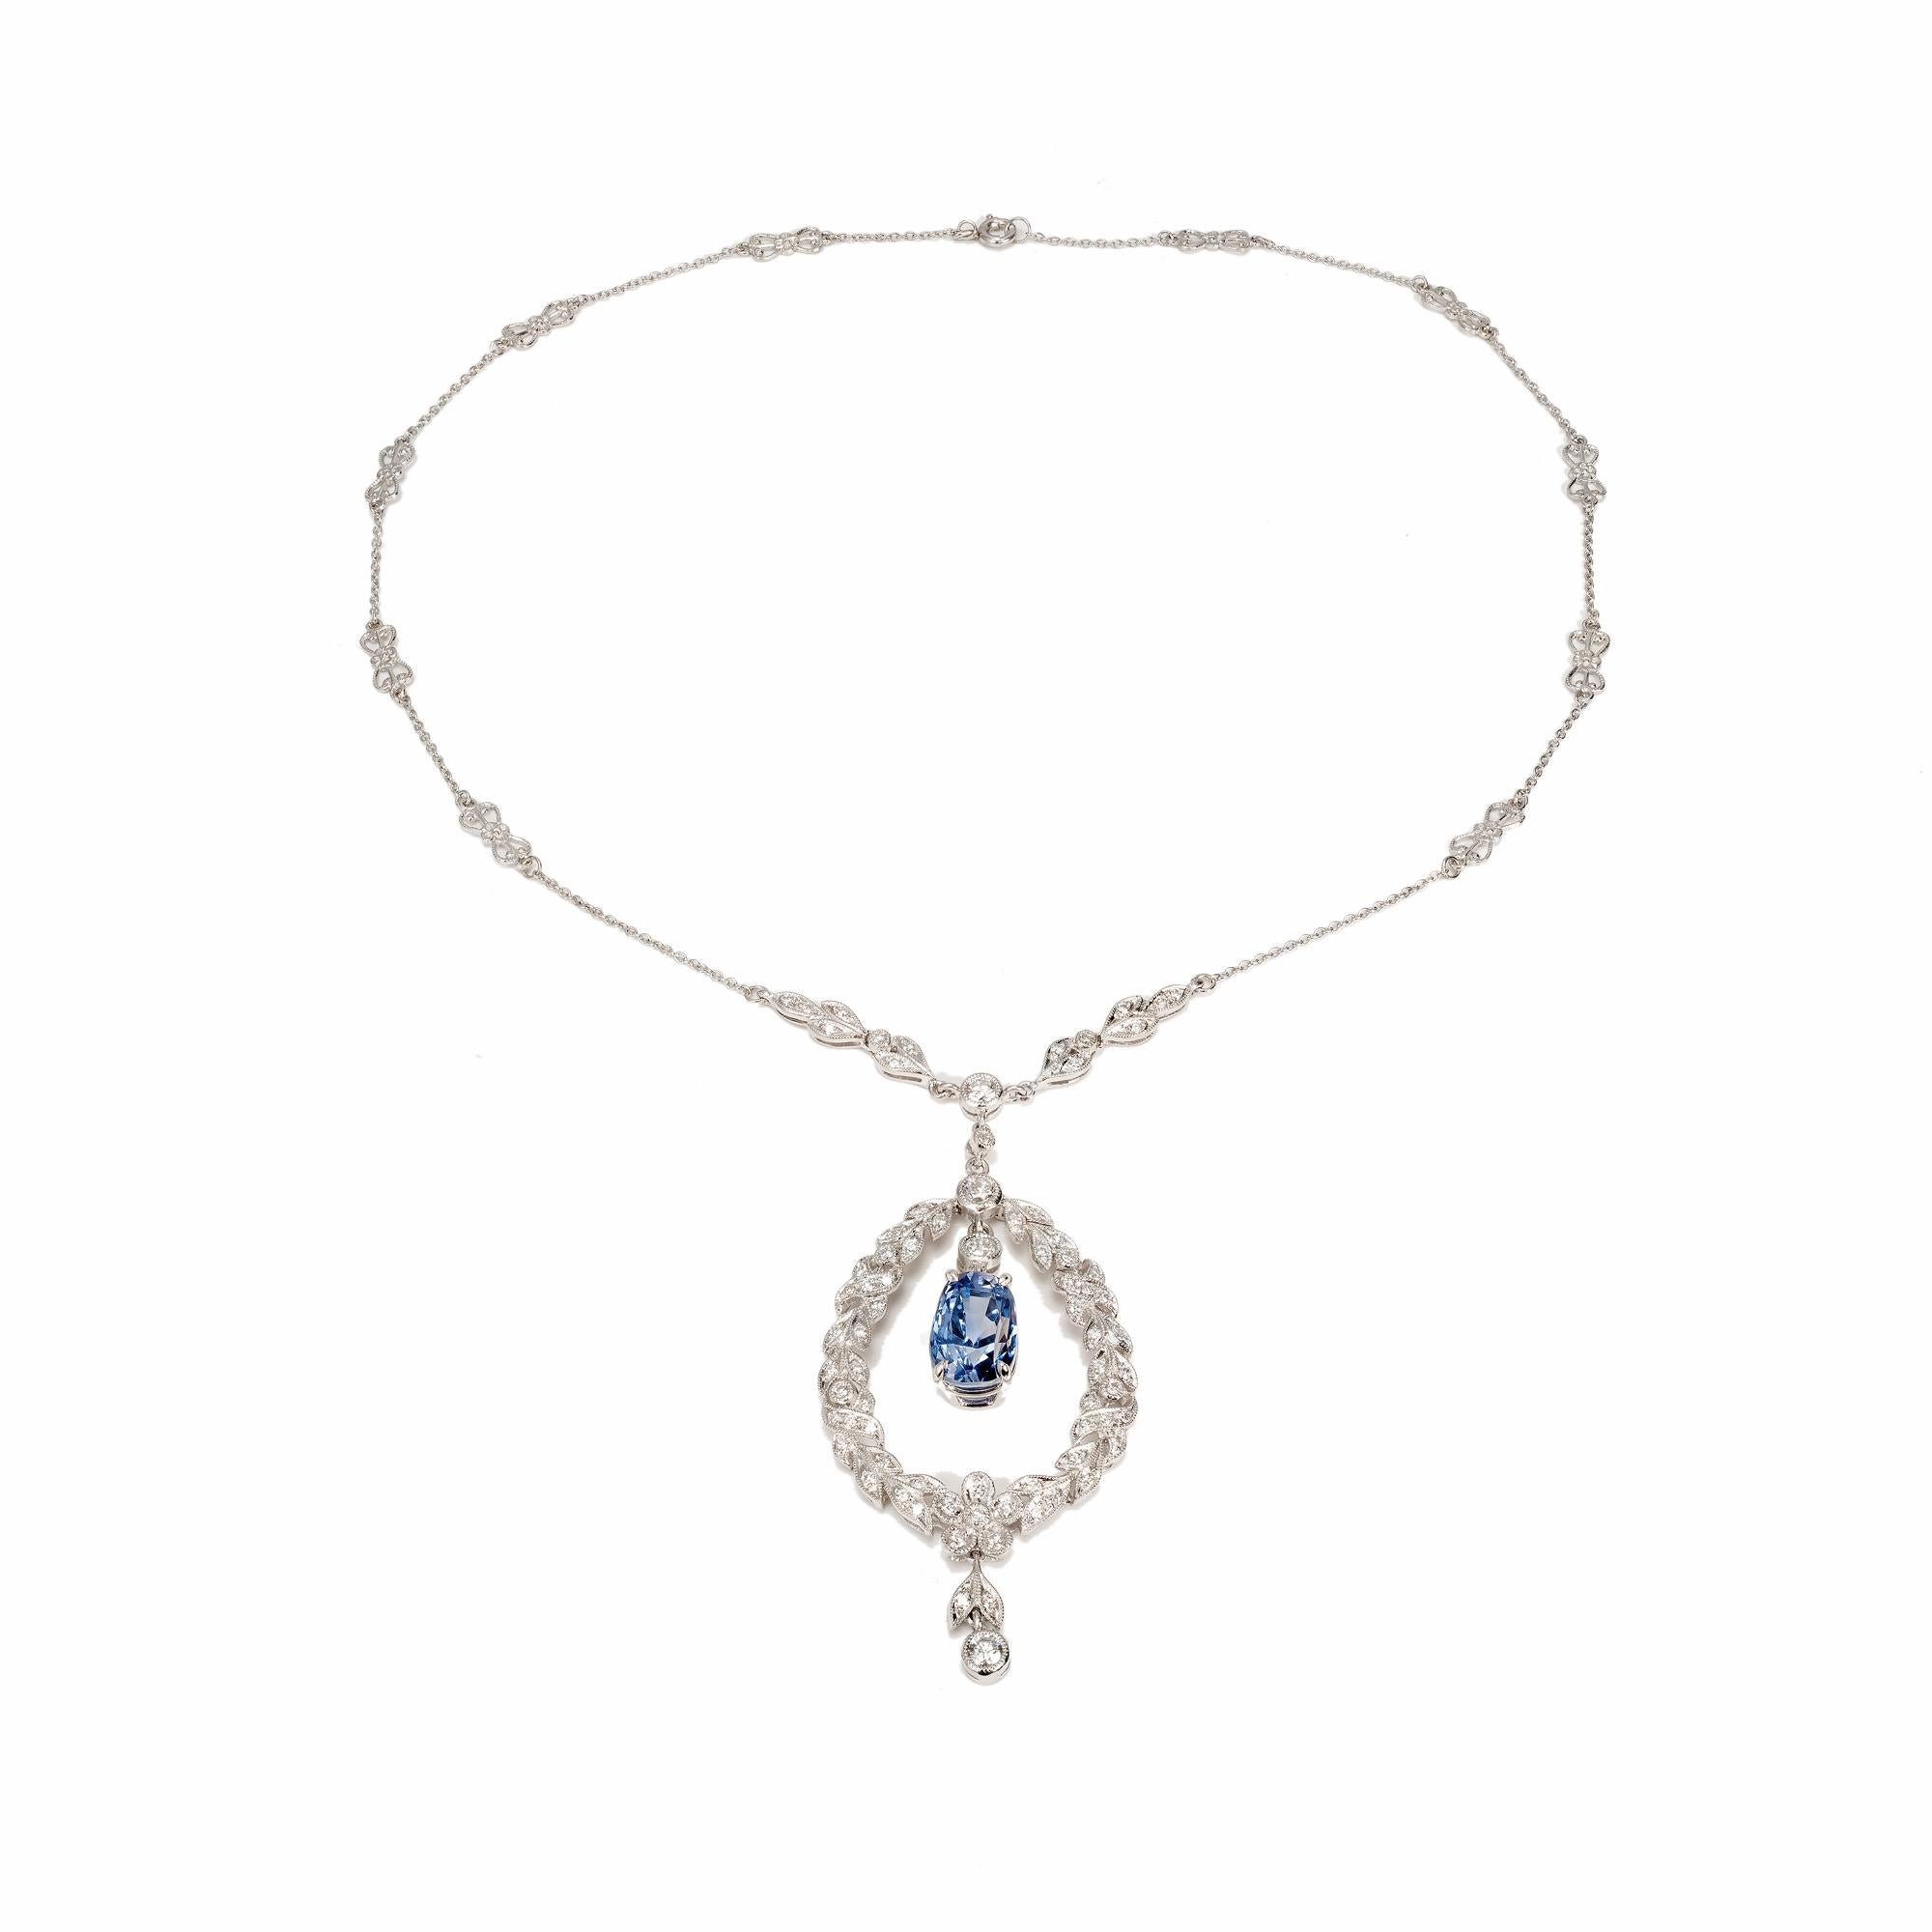 Edwardian sapphire and diamond pendant necklace set with a tapered cushion cut natural periwinkle blue center Sapphire. Platinum chain attached to a wreath with 72 round full cut diamonds. no heat no enhancements. circa 1910

1 oval periwinkle blue